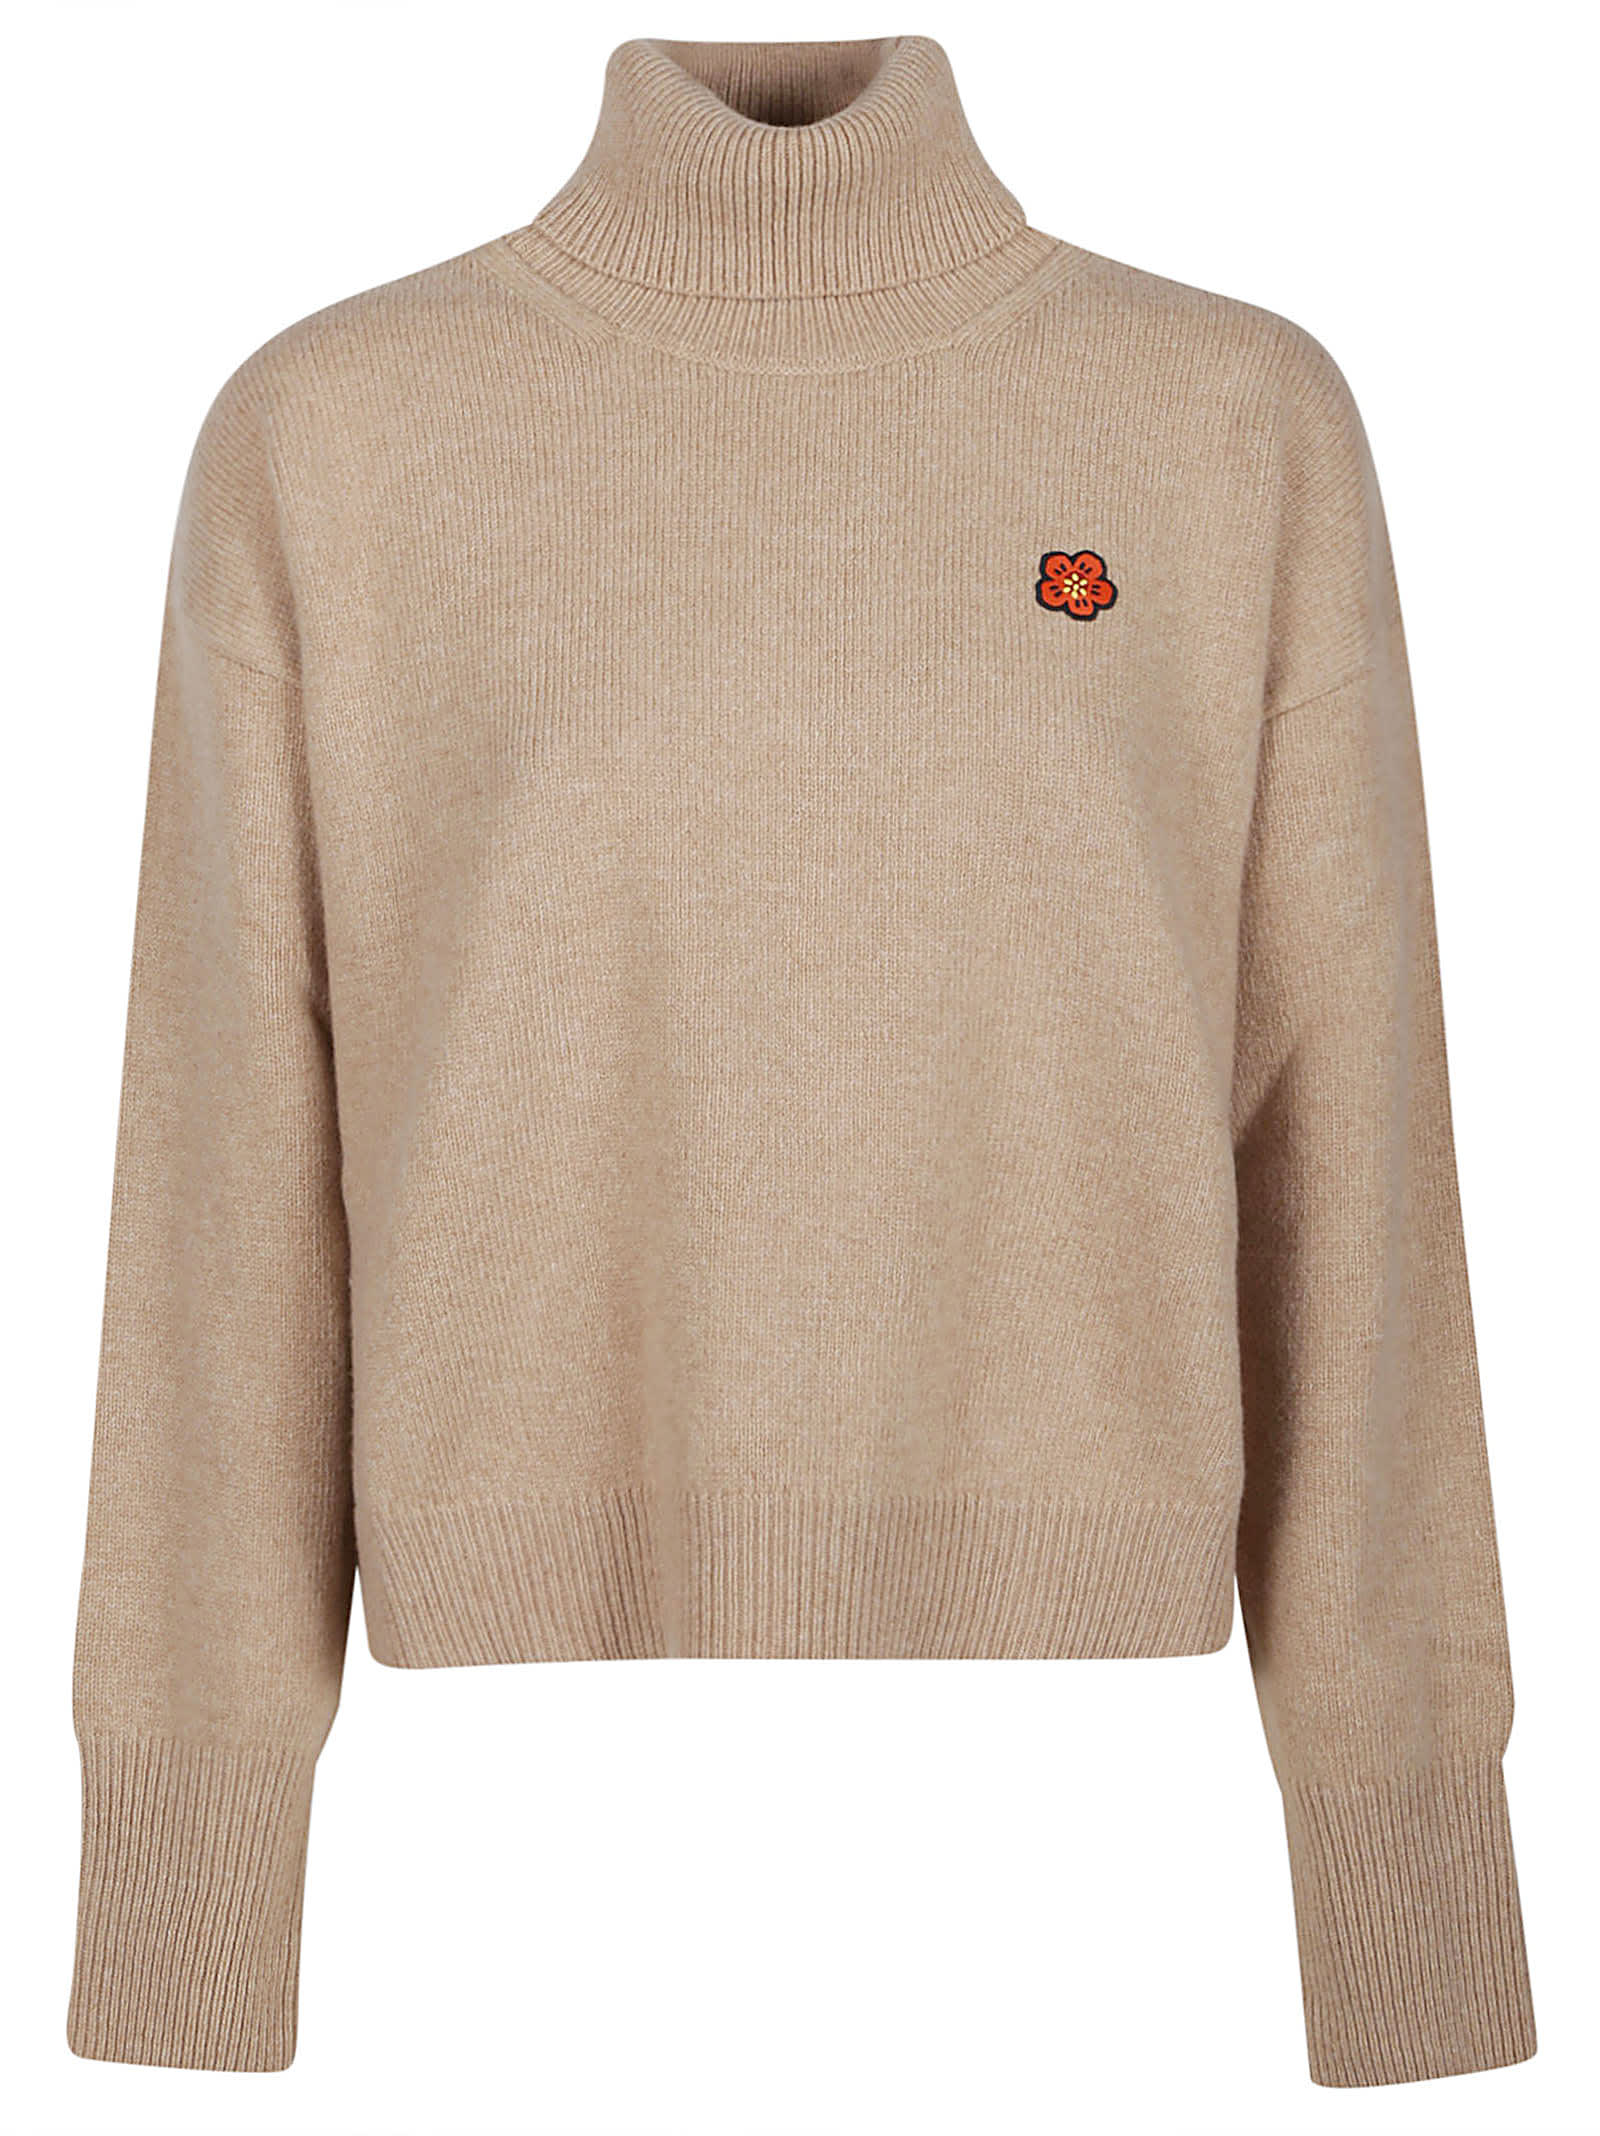 Shop Kenzo Boxy Crest Turtle Neck Sweater In Tabac